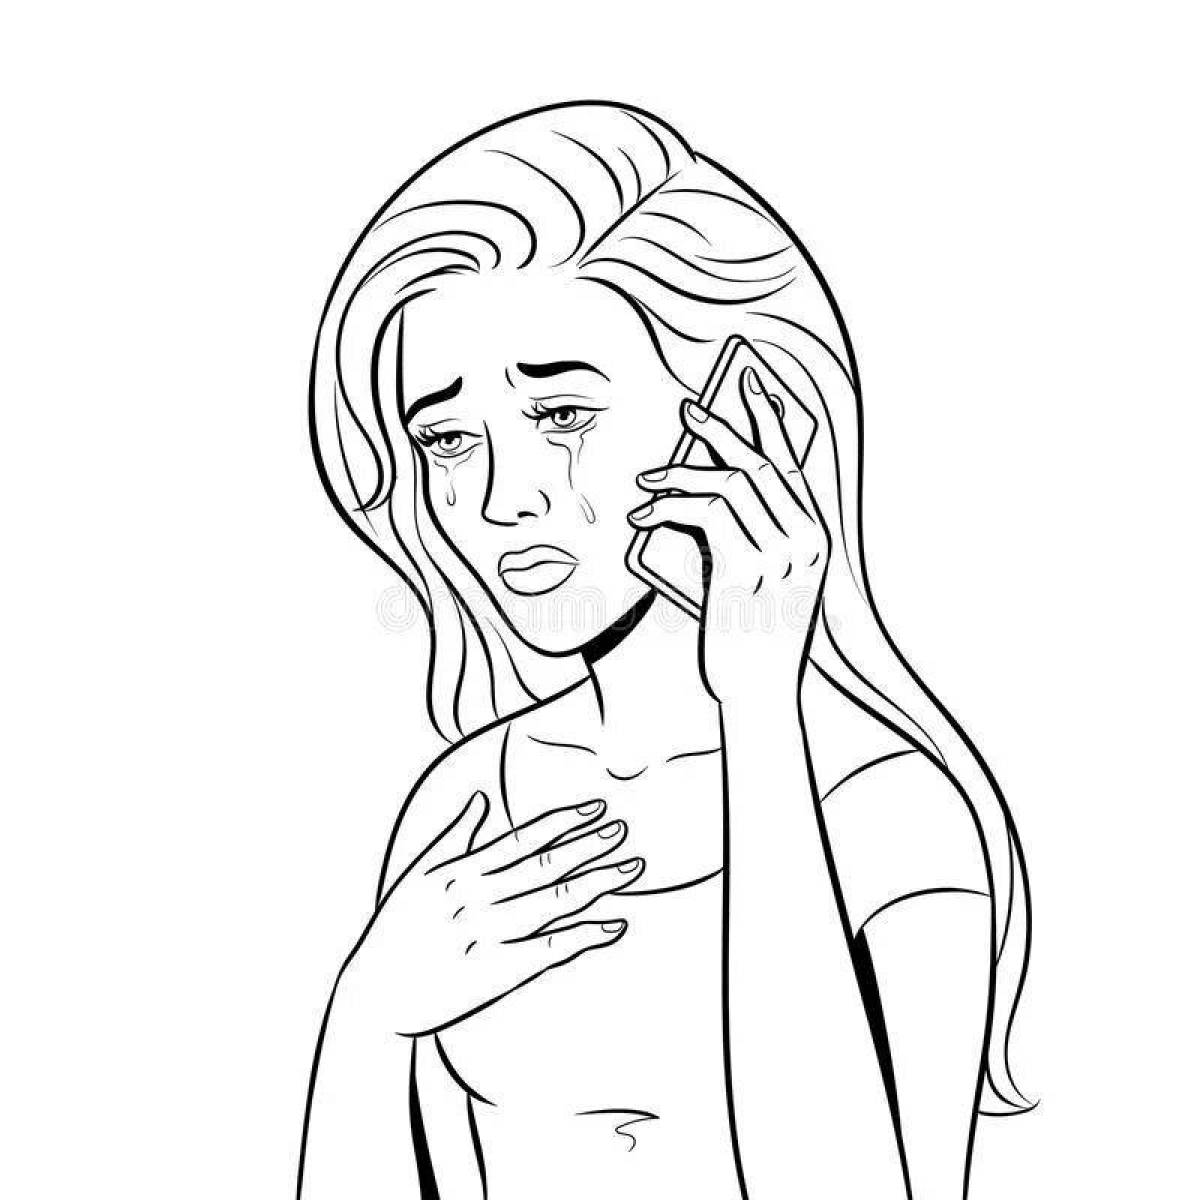 Rejected crying girl